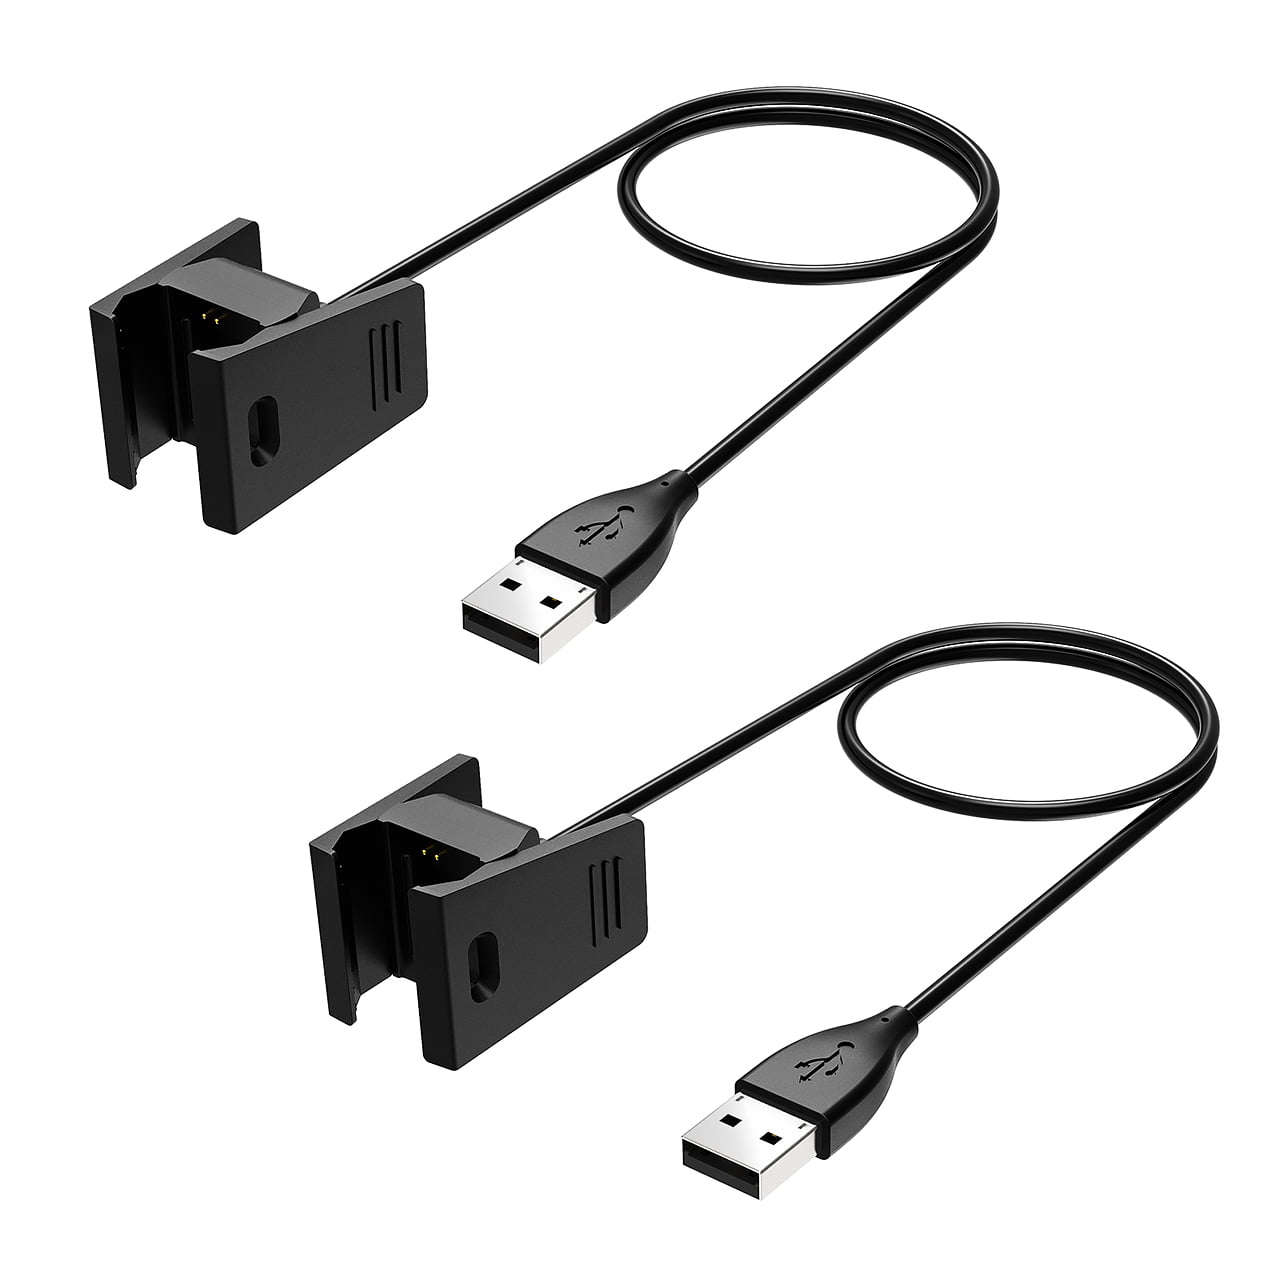 Replacement USB Cord Charging Dock Cable for Fitbit Charge 2 Activity Tracker 